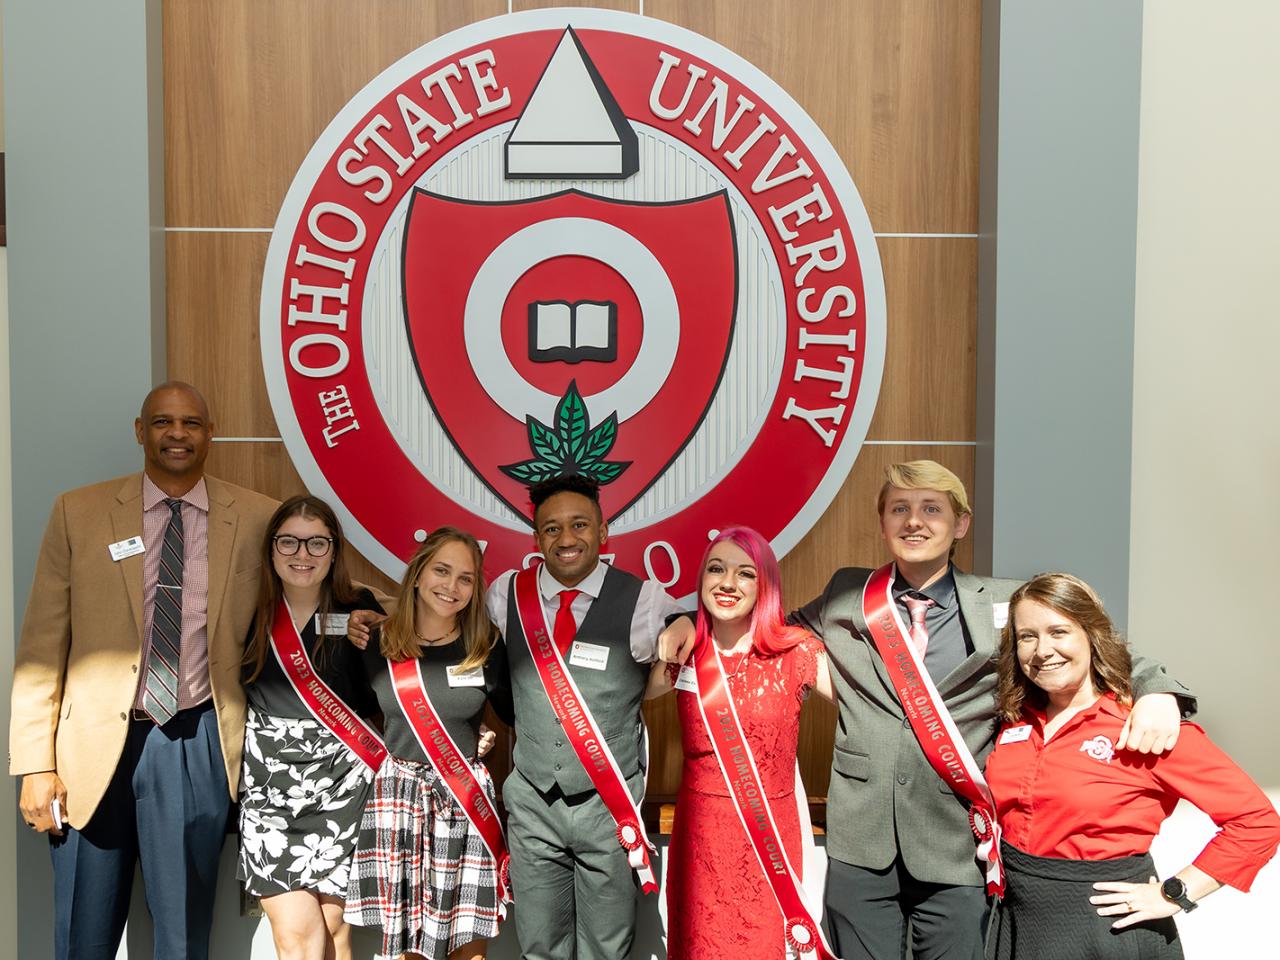 The Homecoming Court members and Office of Student Life staff members stand under the university seal in the Longaberger Alumni House.